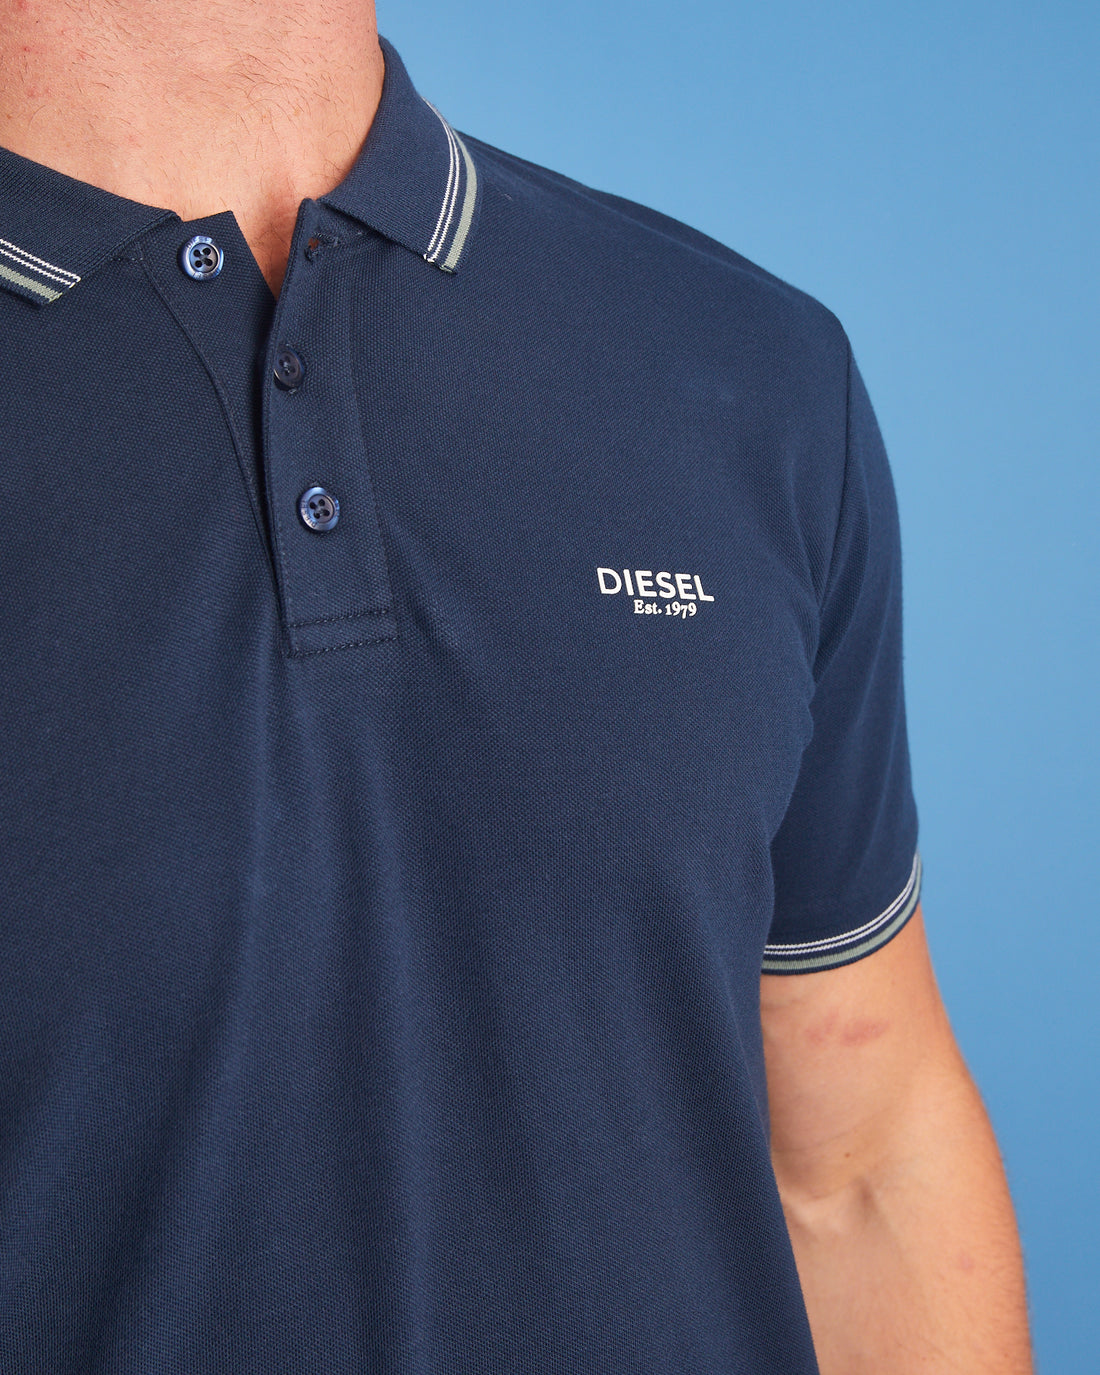 DIESEL Clarksville Polo - Navy Clearing